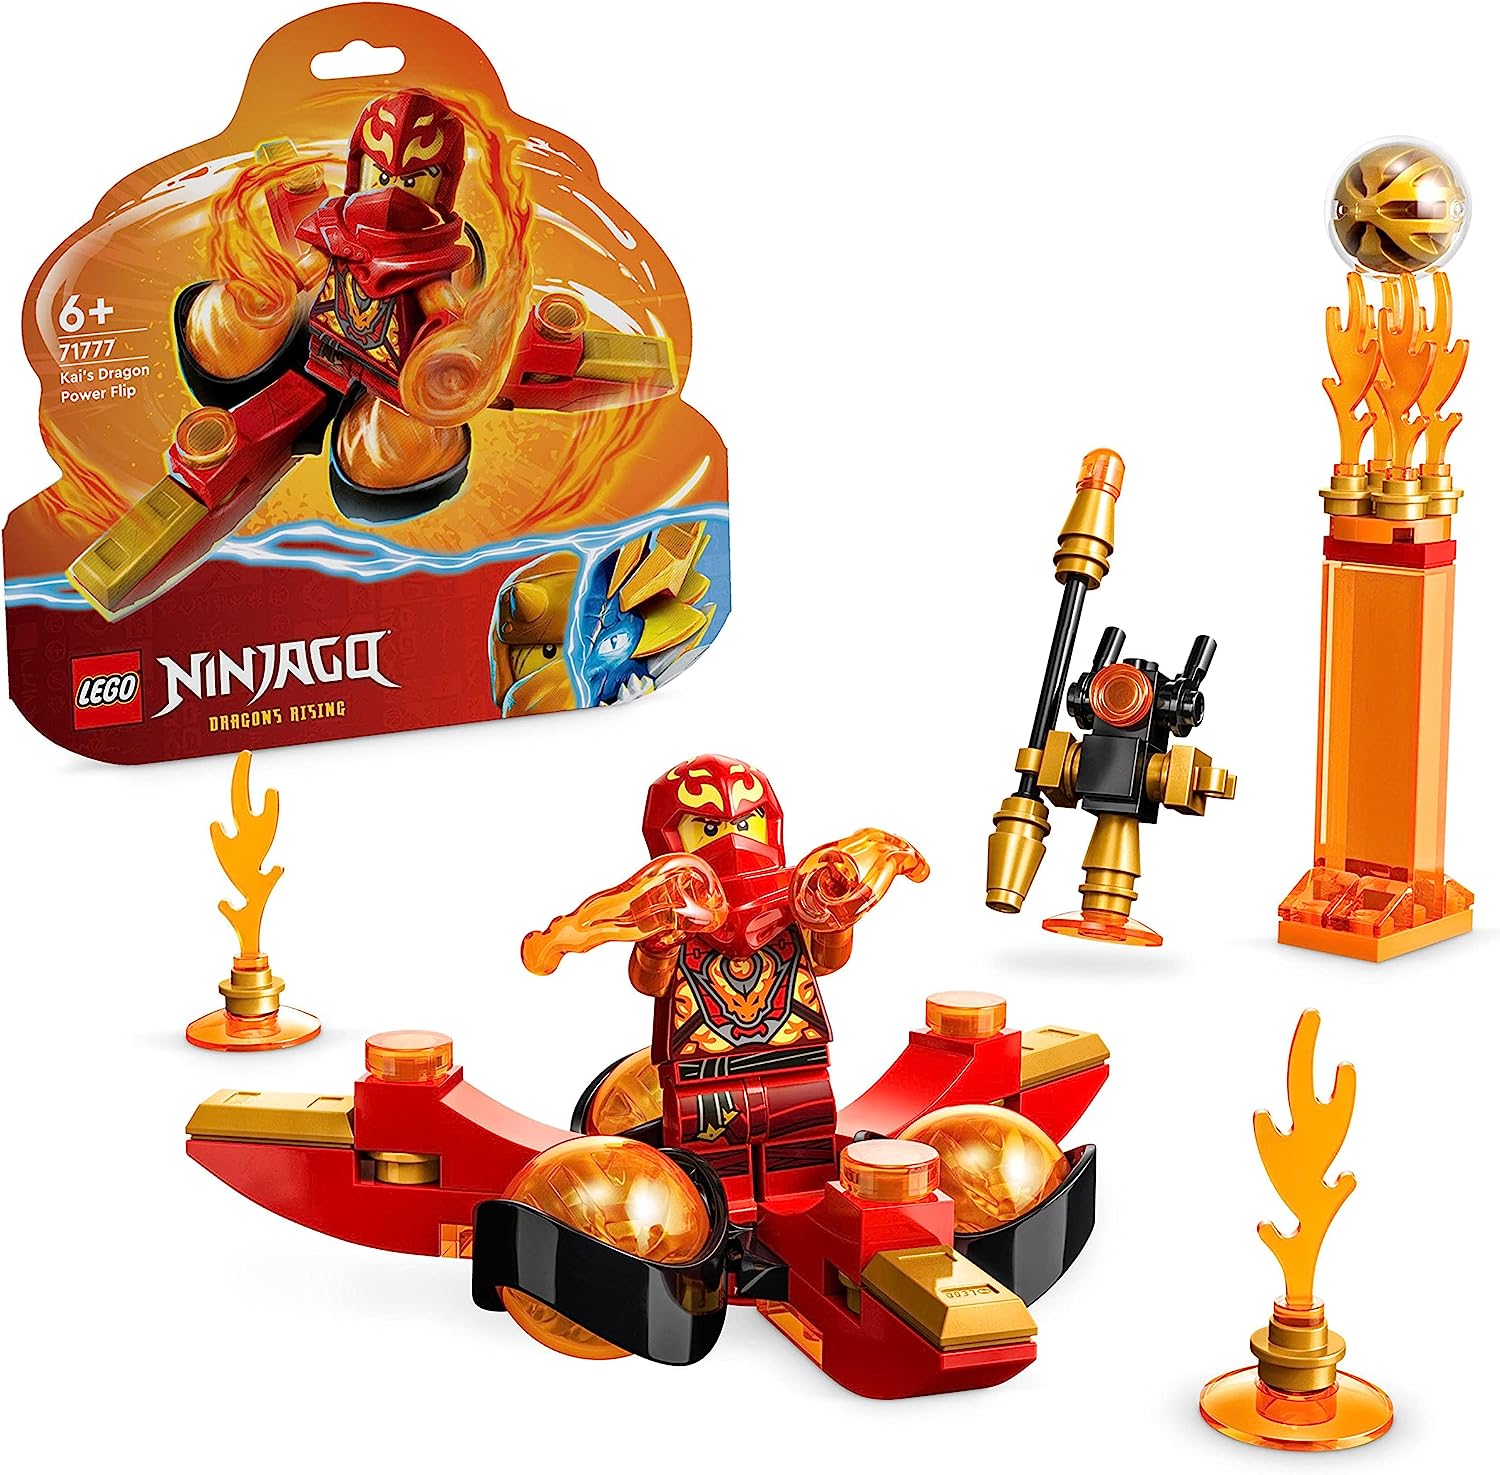 LEGO 71777 Ninjago Kais Dragon Power Spinjitzu Flip Toy, Spinner with Art Pieces, Mini Figure Kai to Collect, Small Gift for Children from 6 Years